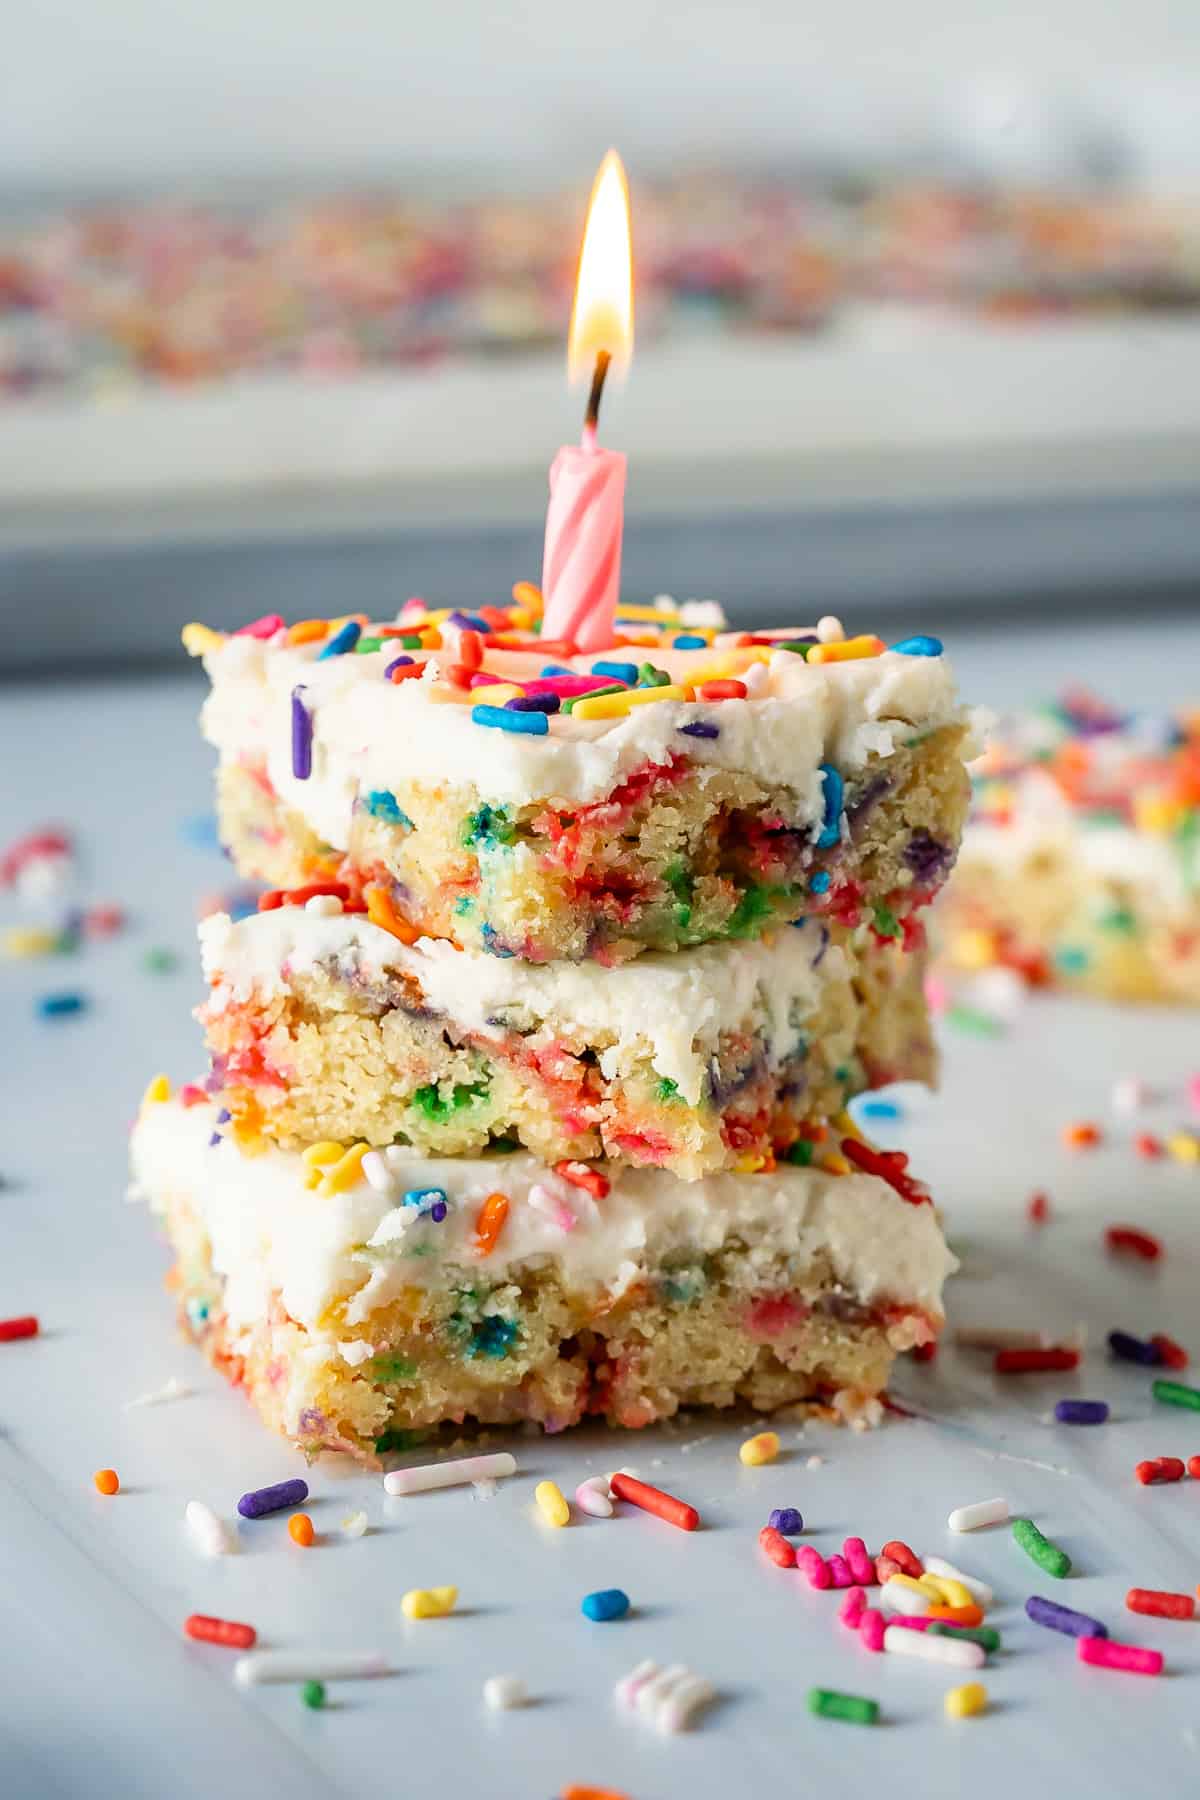 A stack of three pieces of vegan gluten free funfetti birthday cake with a pink birthday candle.